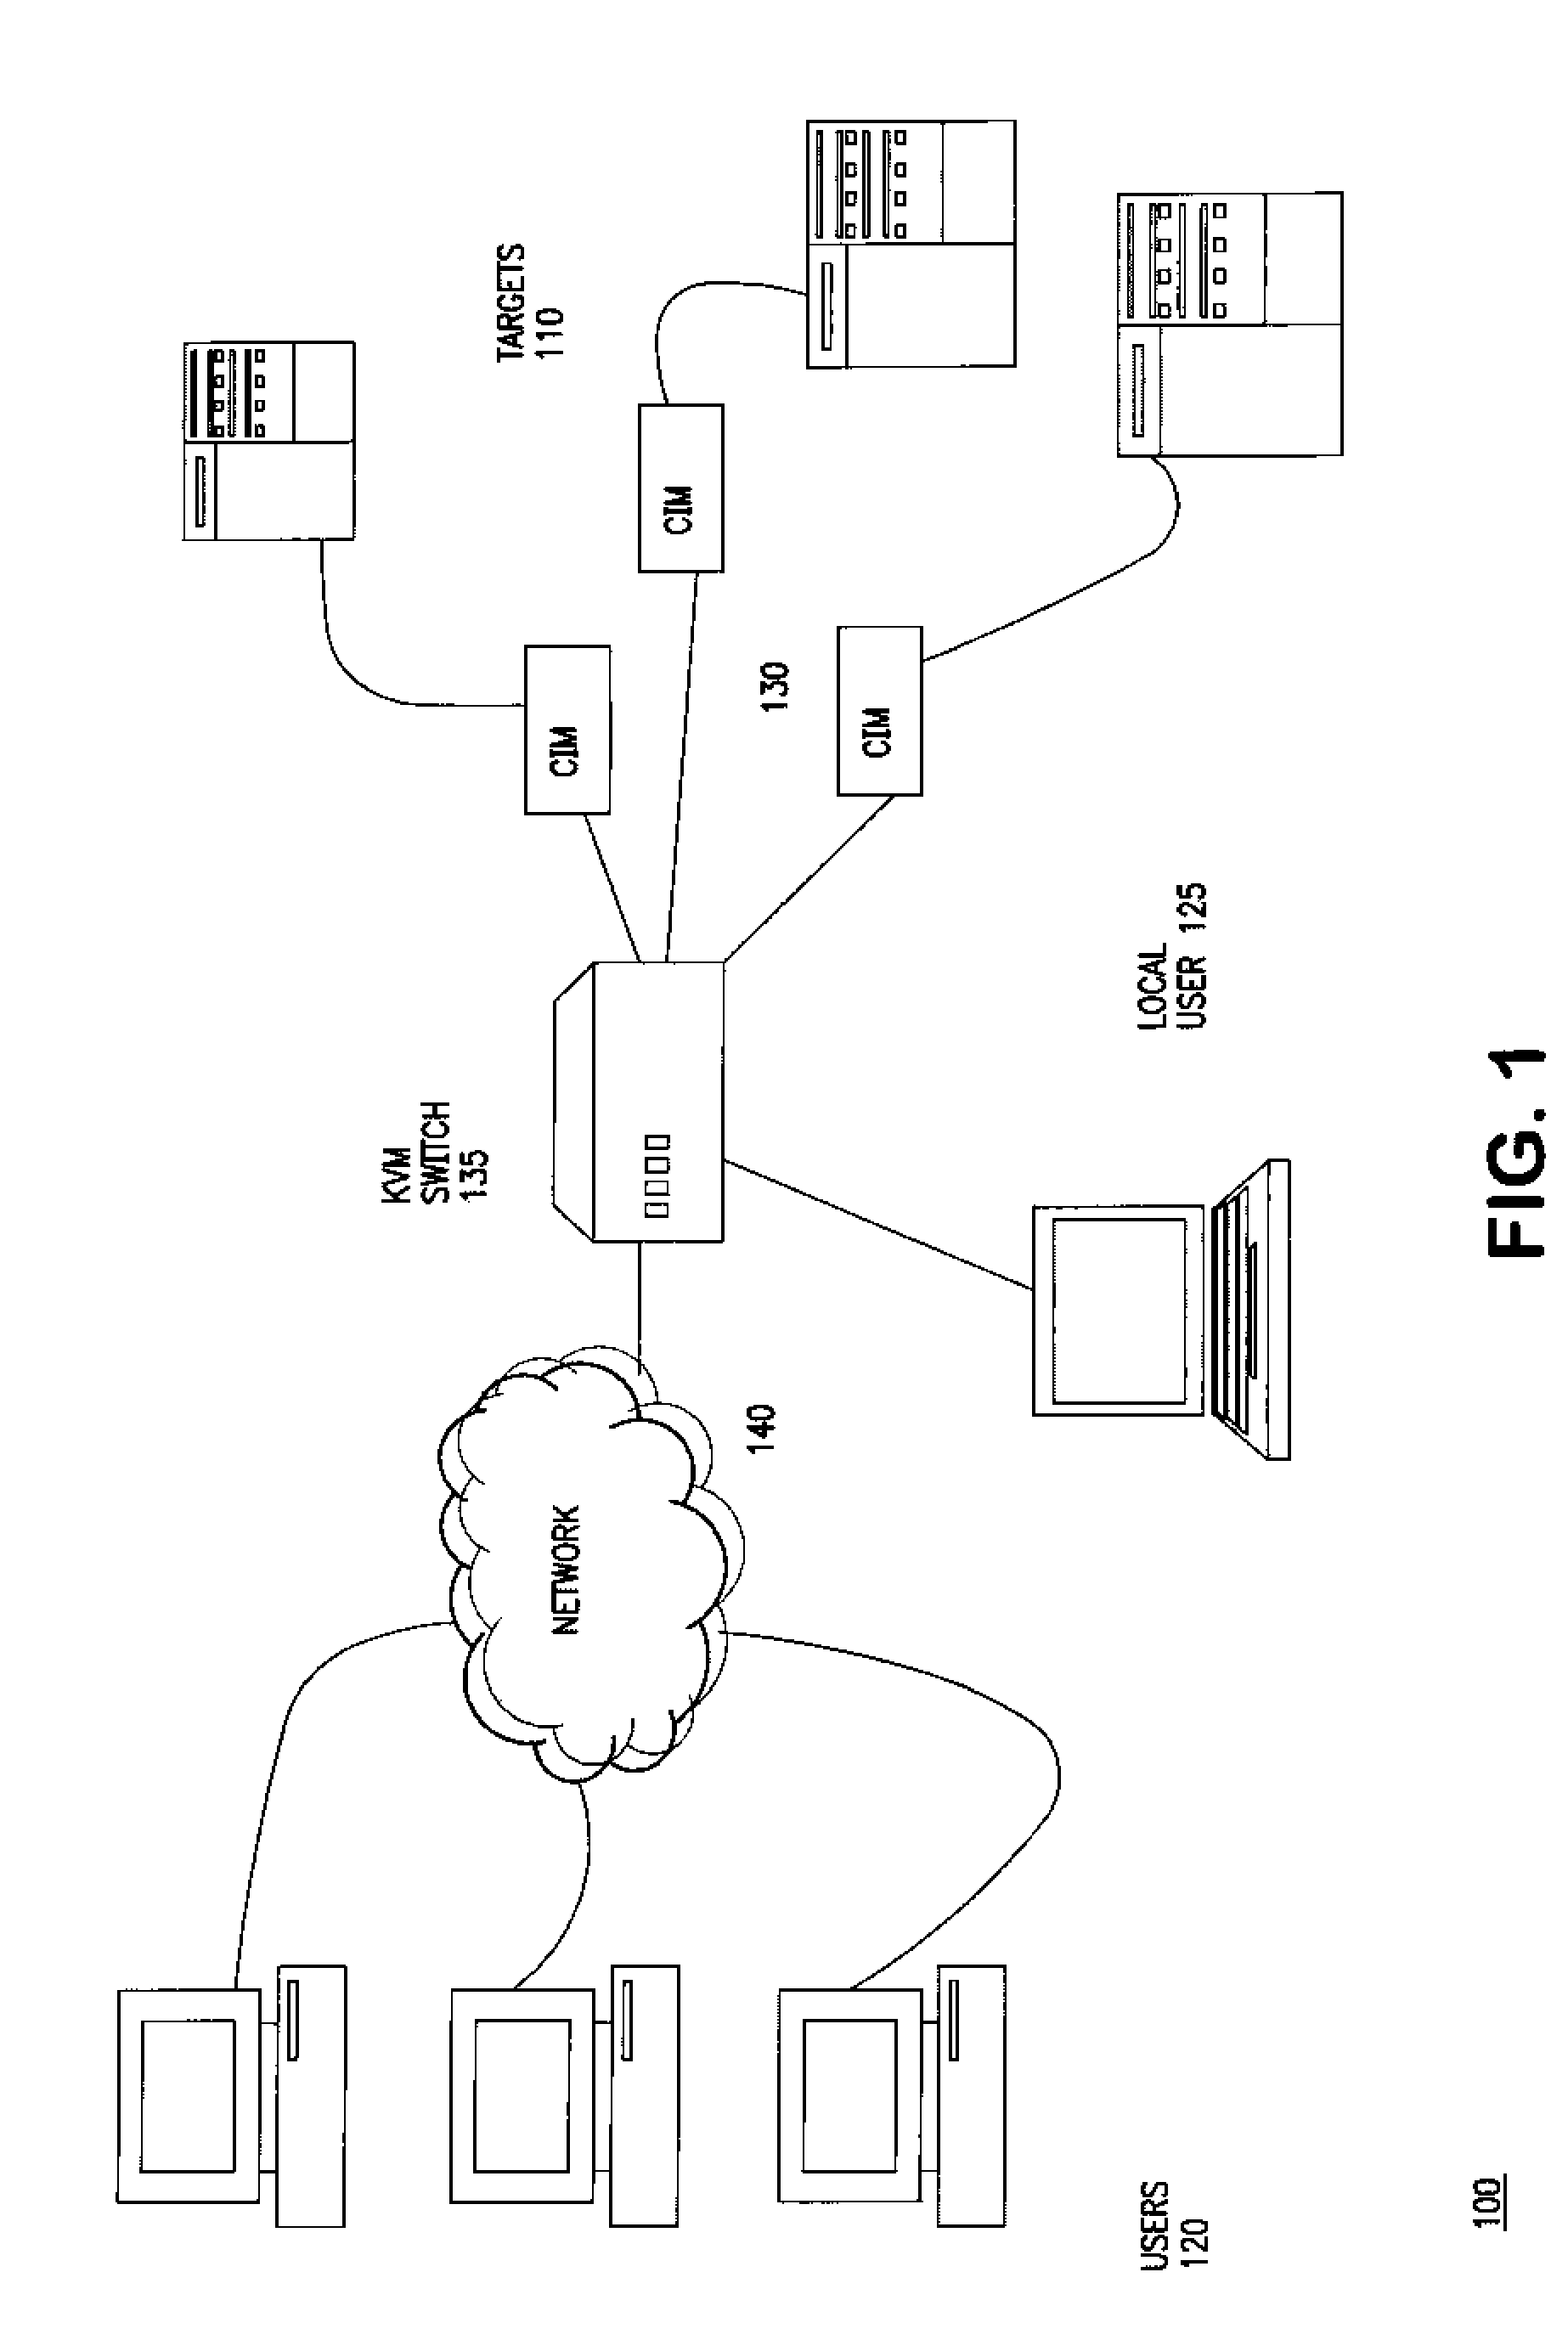 Methods for adaptive video quality enhancement